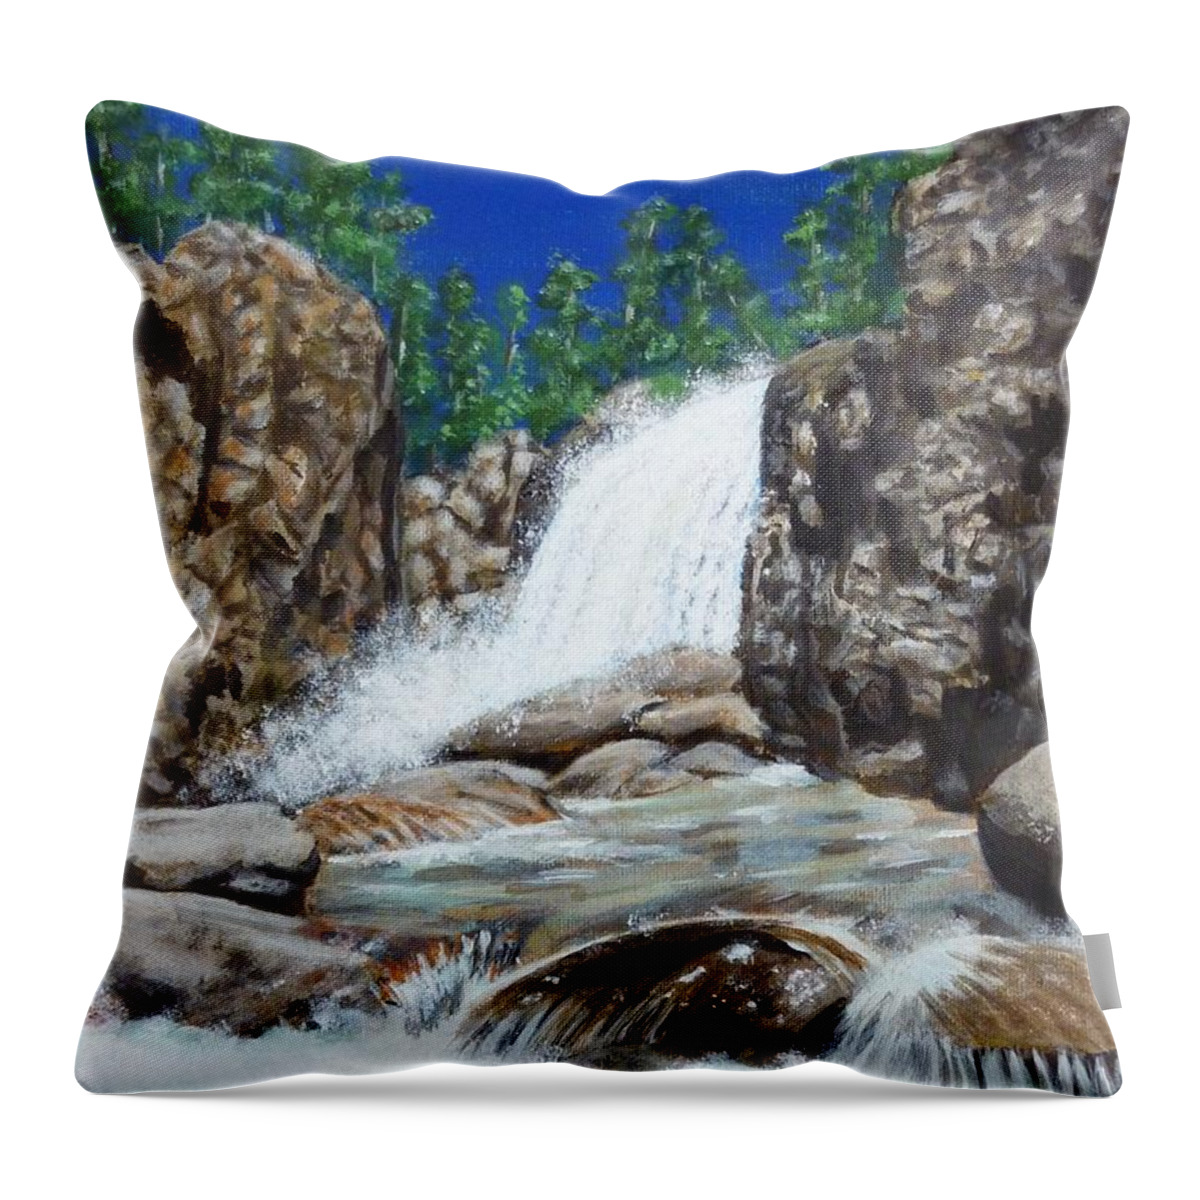 Colorado Waterfall Throw Pillow featuring the painting Colorado by Amelie Simmons